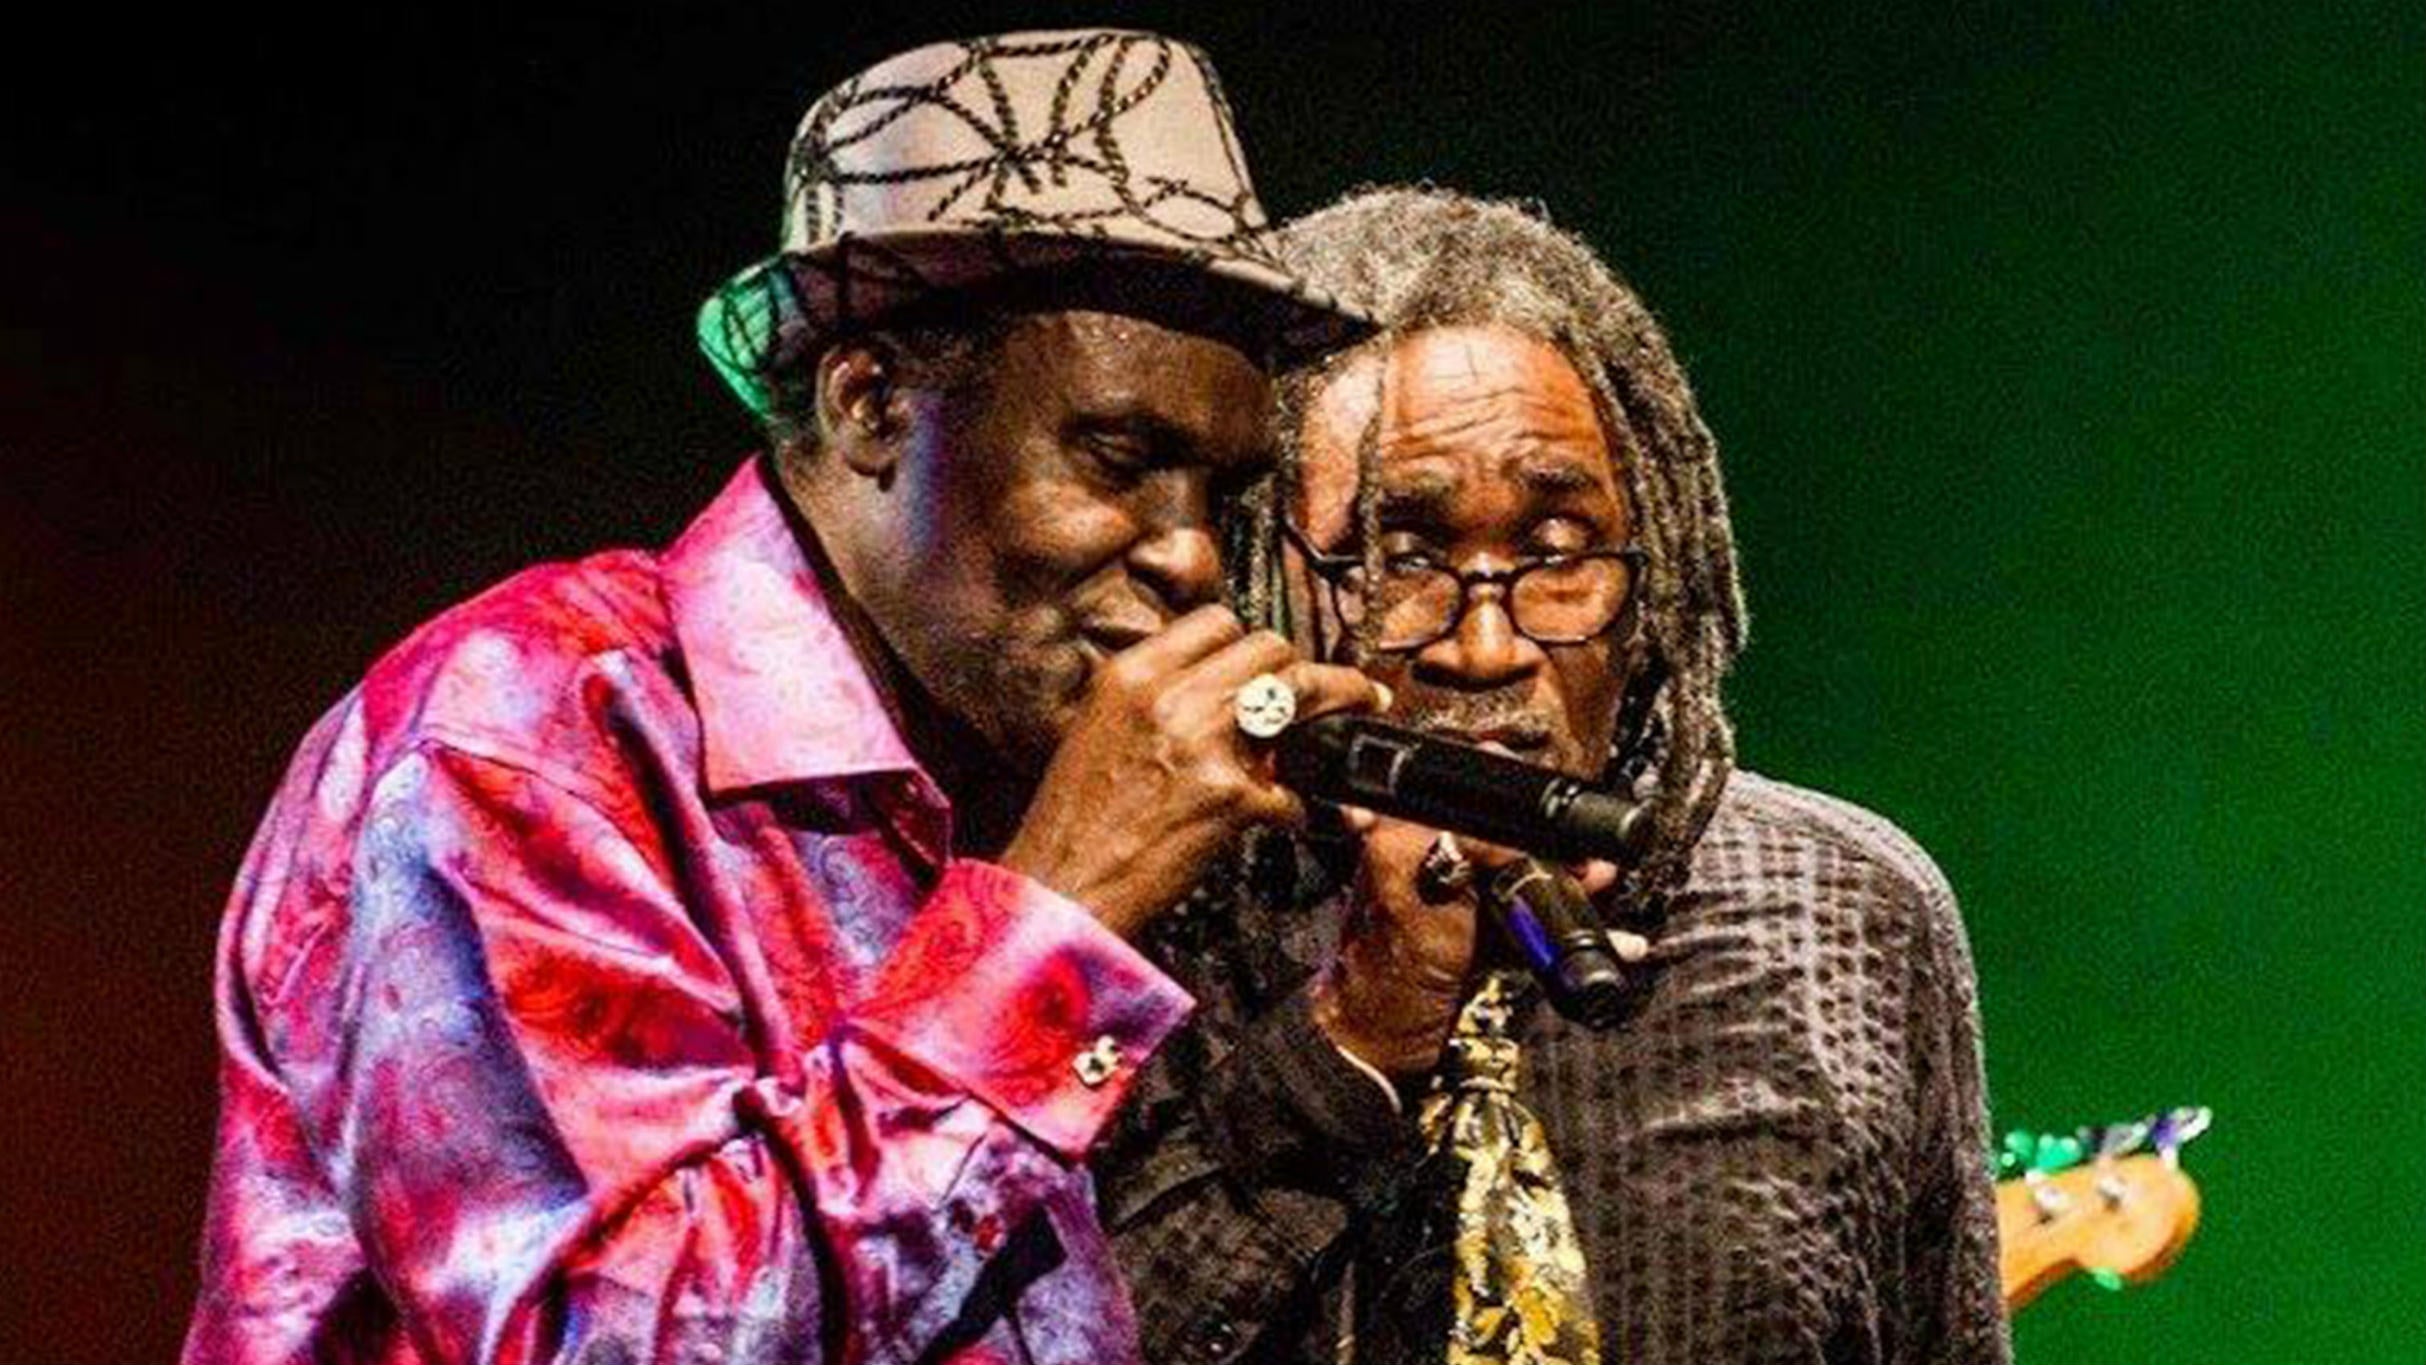 Wailing Souls at The Venice West